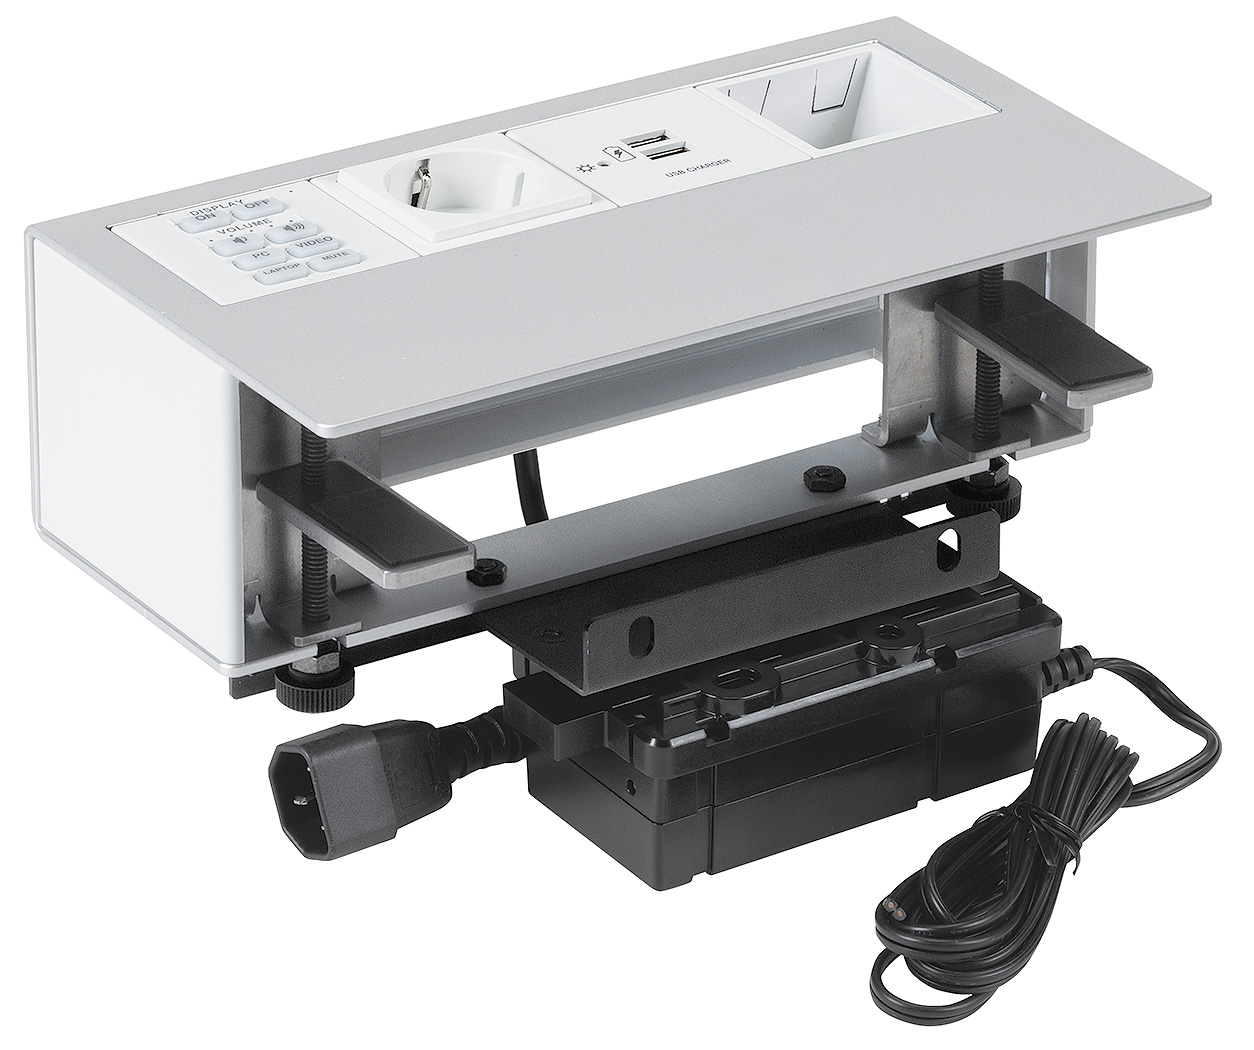 Cable Cubby F55 Edge is compatible with ZipClip and PMK 155 mounting products to install power supplies and other devices beneath the table for a quick and secure installation